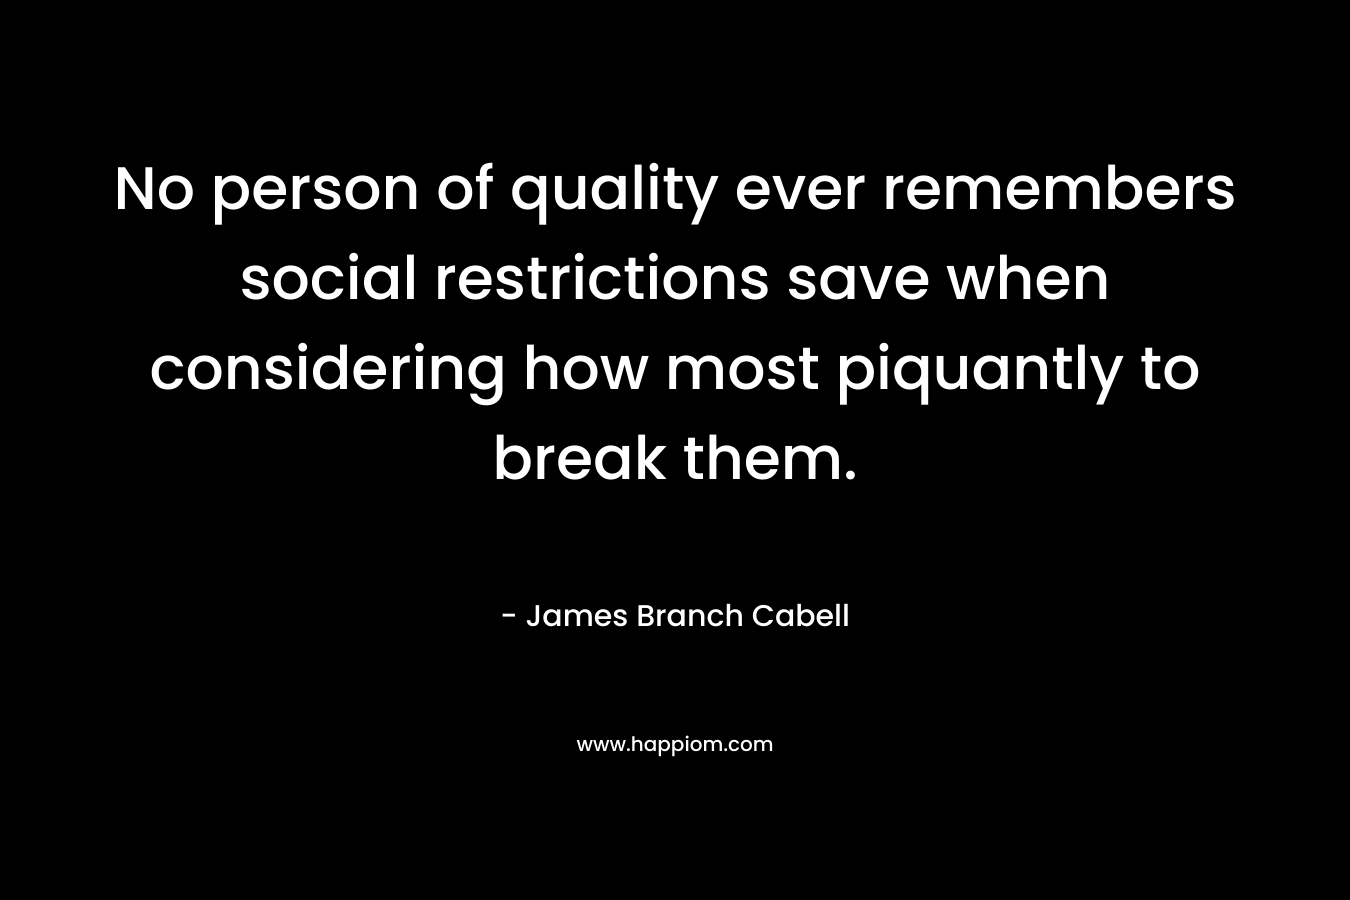 No person of quality ever remembers social restrictions save when considering how most piquantly to break them.